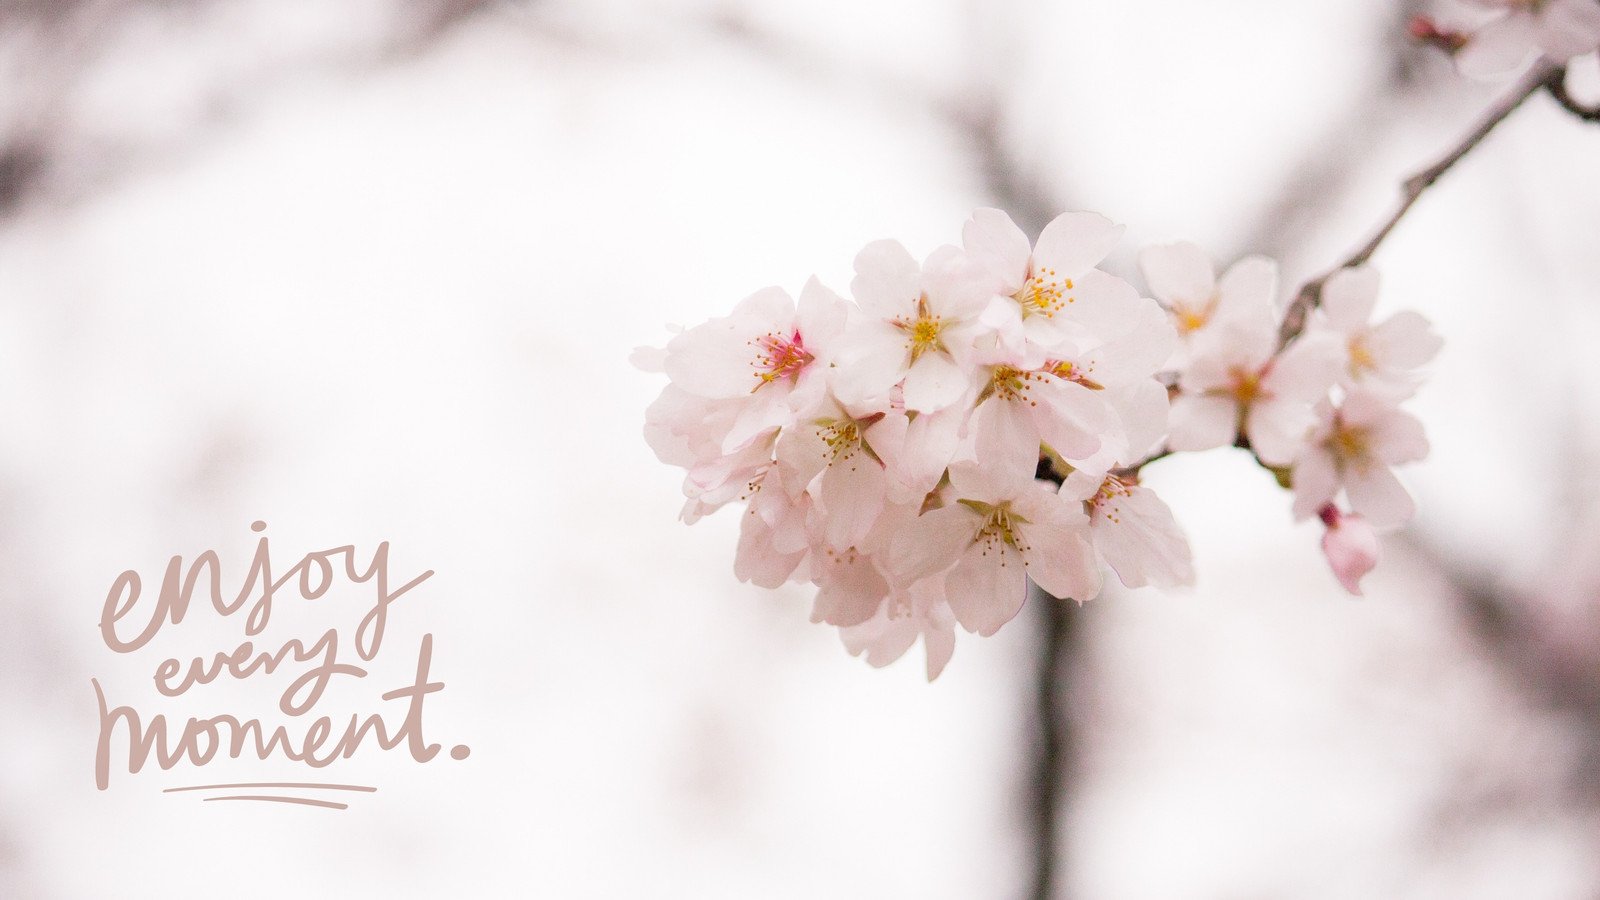 Page 3 - Free and customizable spring desktop wallpaper templates